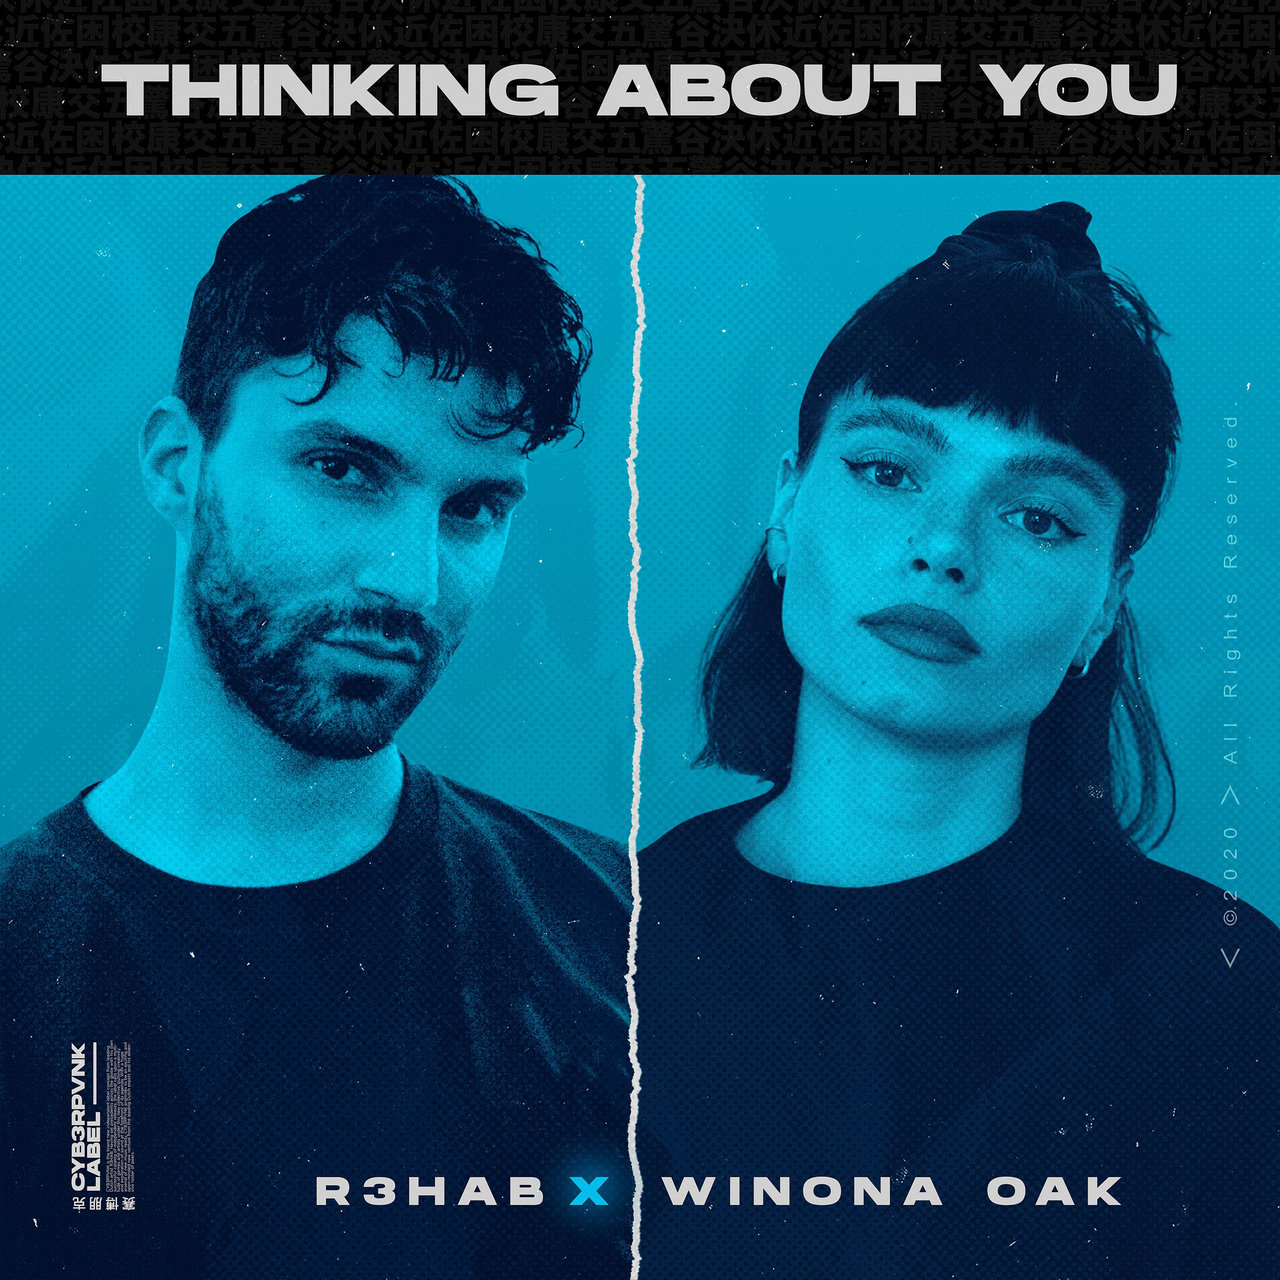 R3HAB & Winona Oak — Thinking About You cover artwork